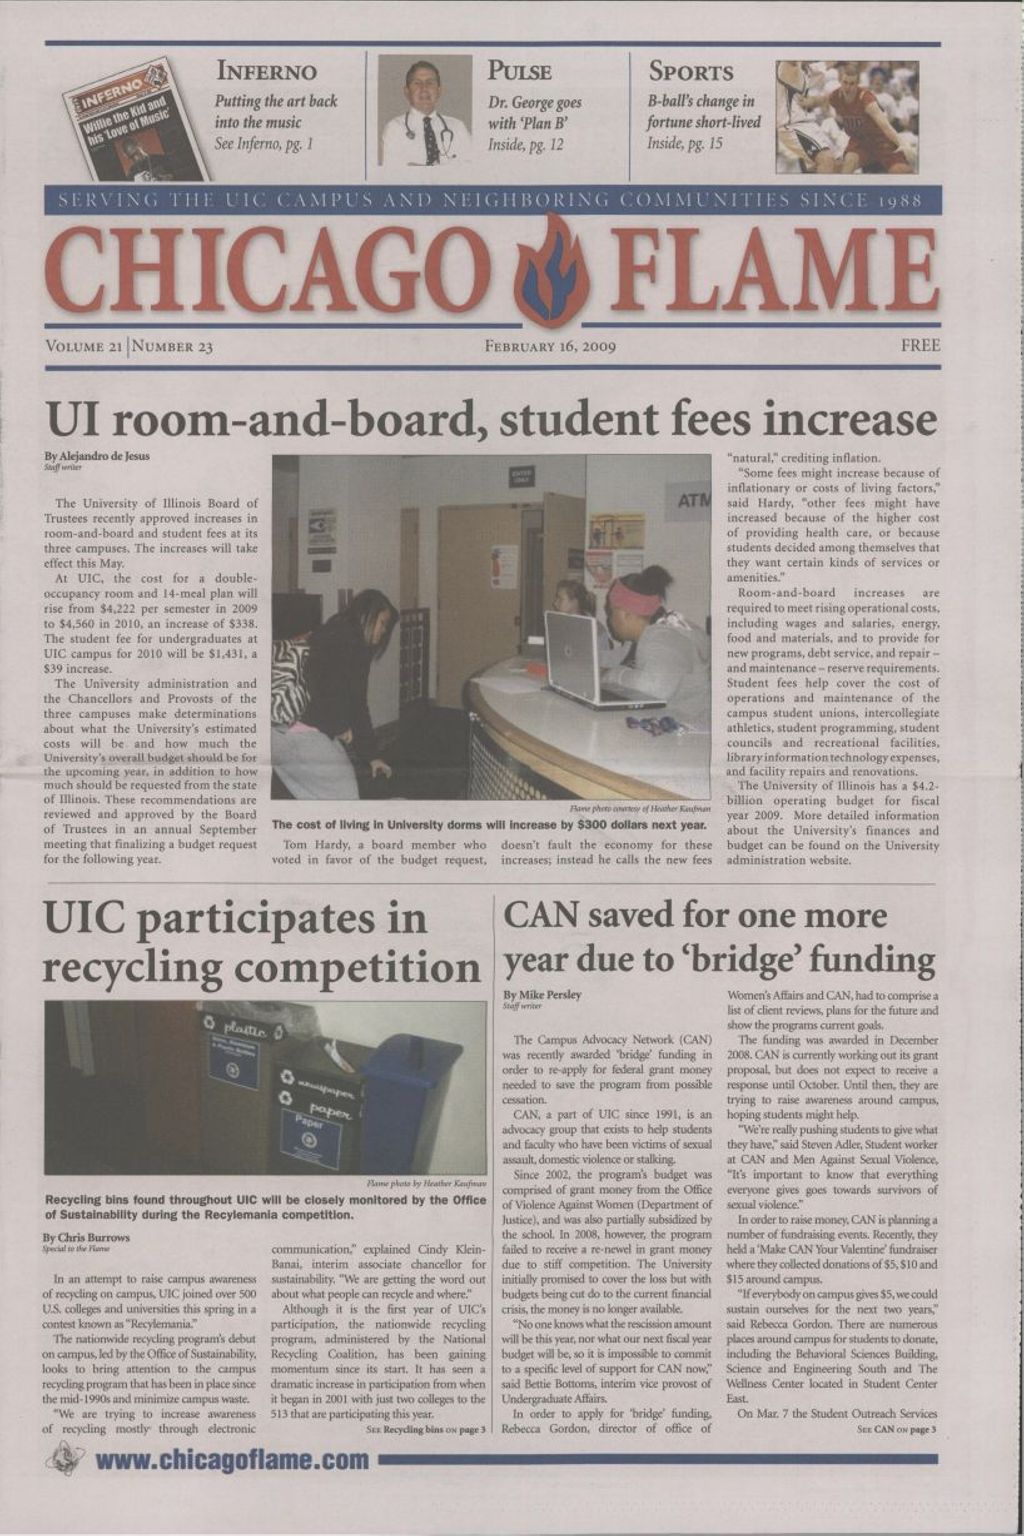 Chicago Flame (February 16, 2009)